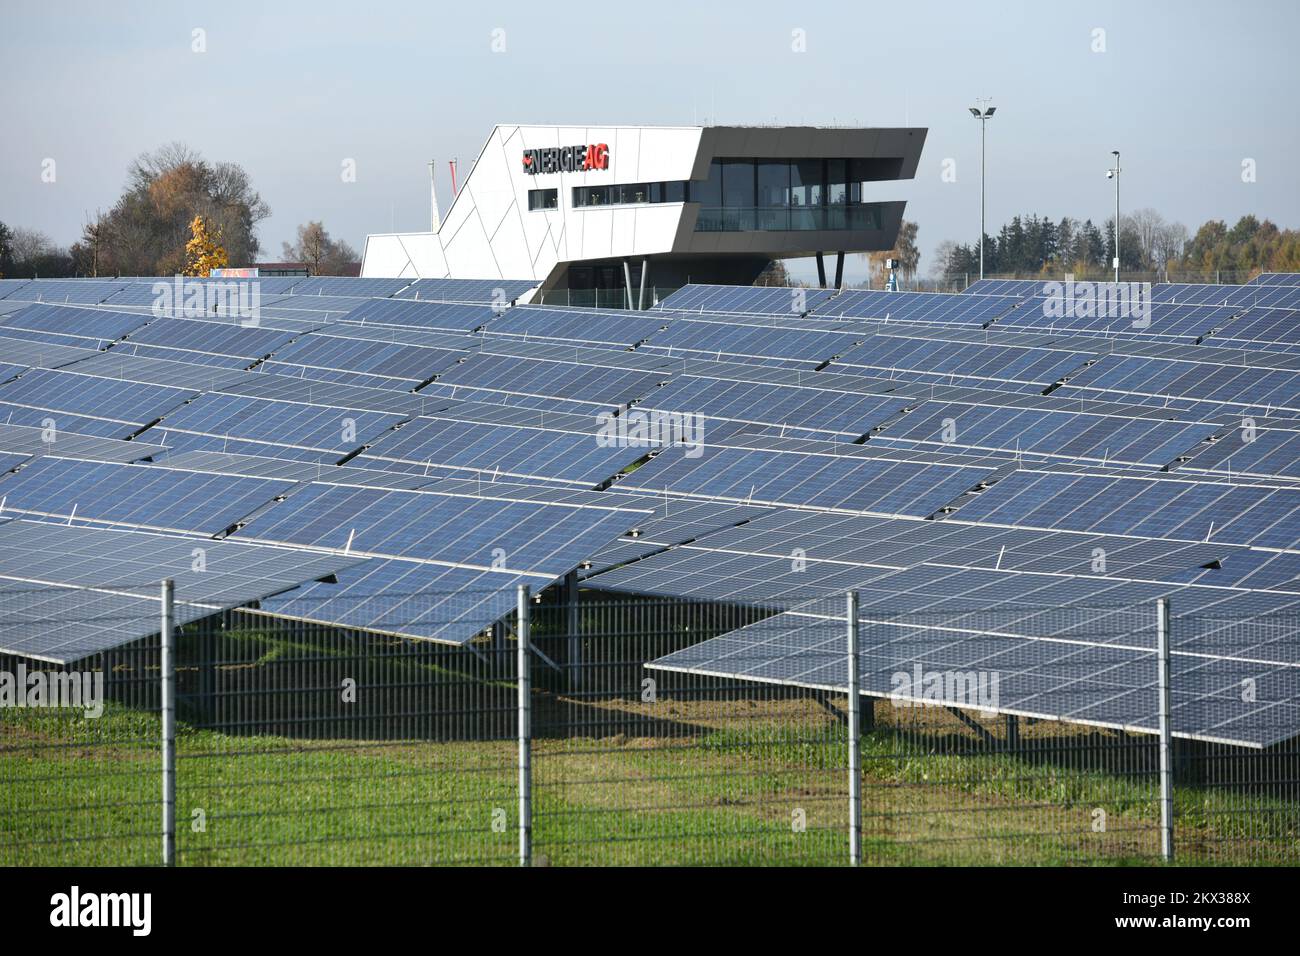 Solar campus with photovoltaic research power plant of EnergieAG in Eberstalzell (Upper Austria), Austria; Stock Photo